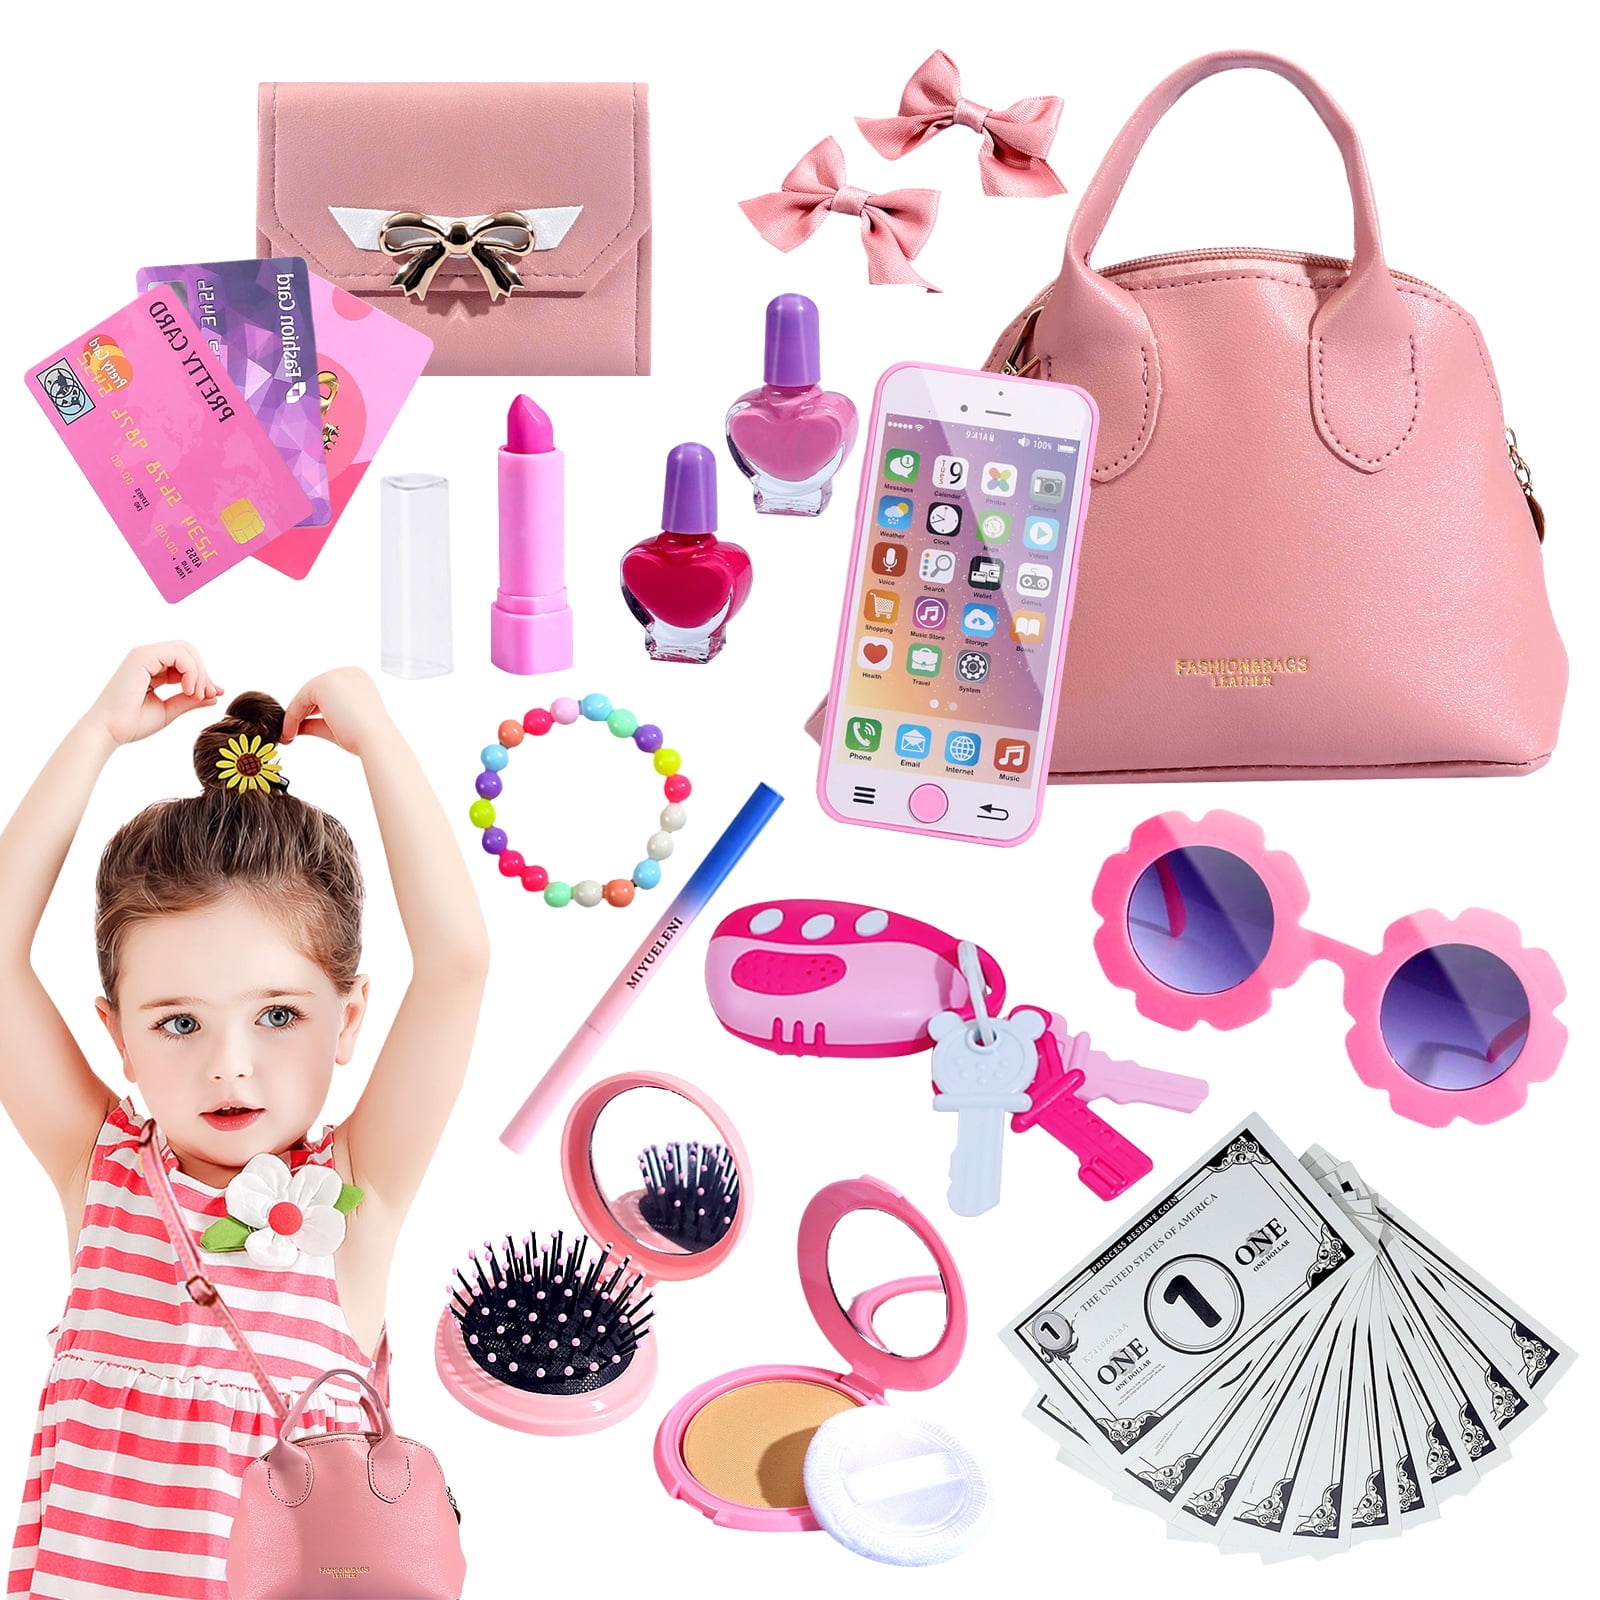 Buy My Beary First Purse 9-Piece Gift Set - Includes Purse, Storybook, and  Accessories - Great Pretend Play Toy for Toddler and Little Girls Ages 1 2  3 4 Years Old Online